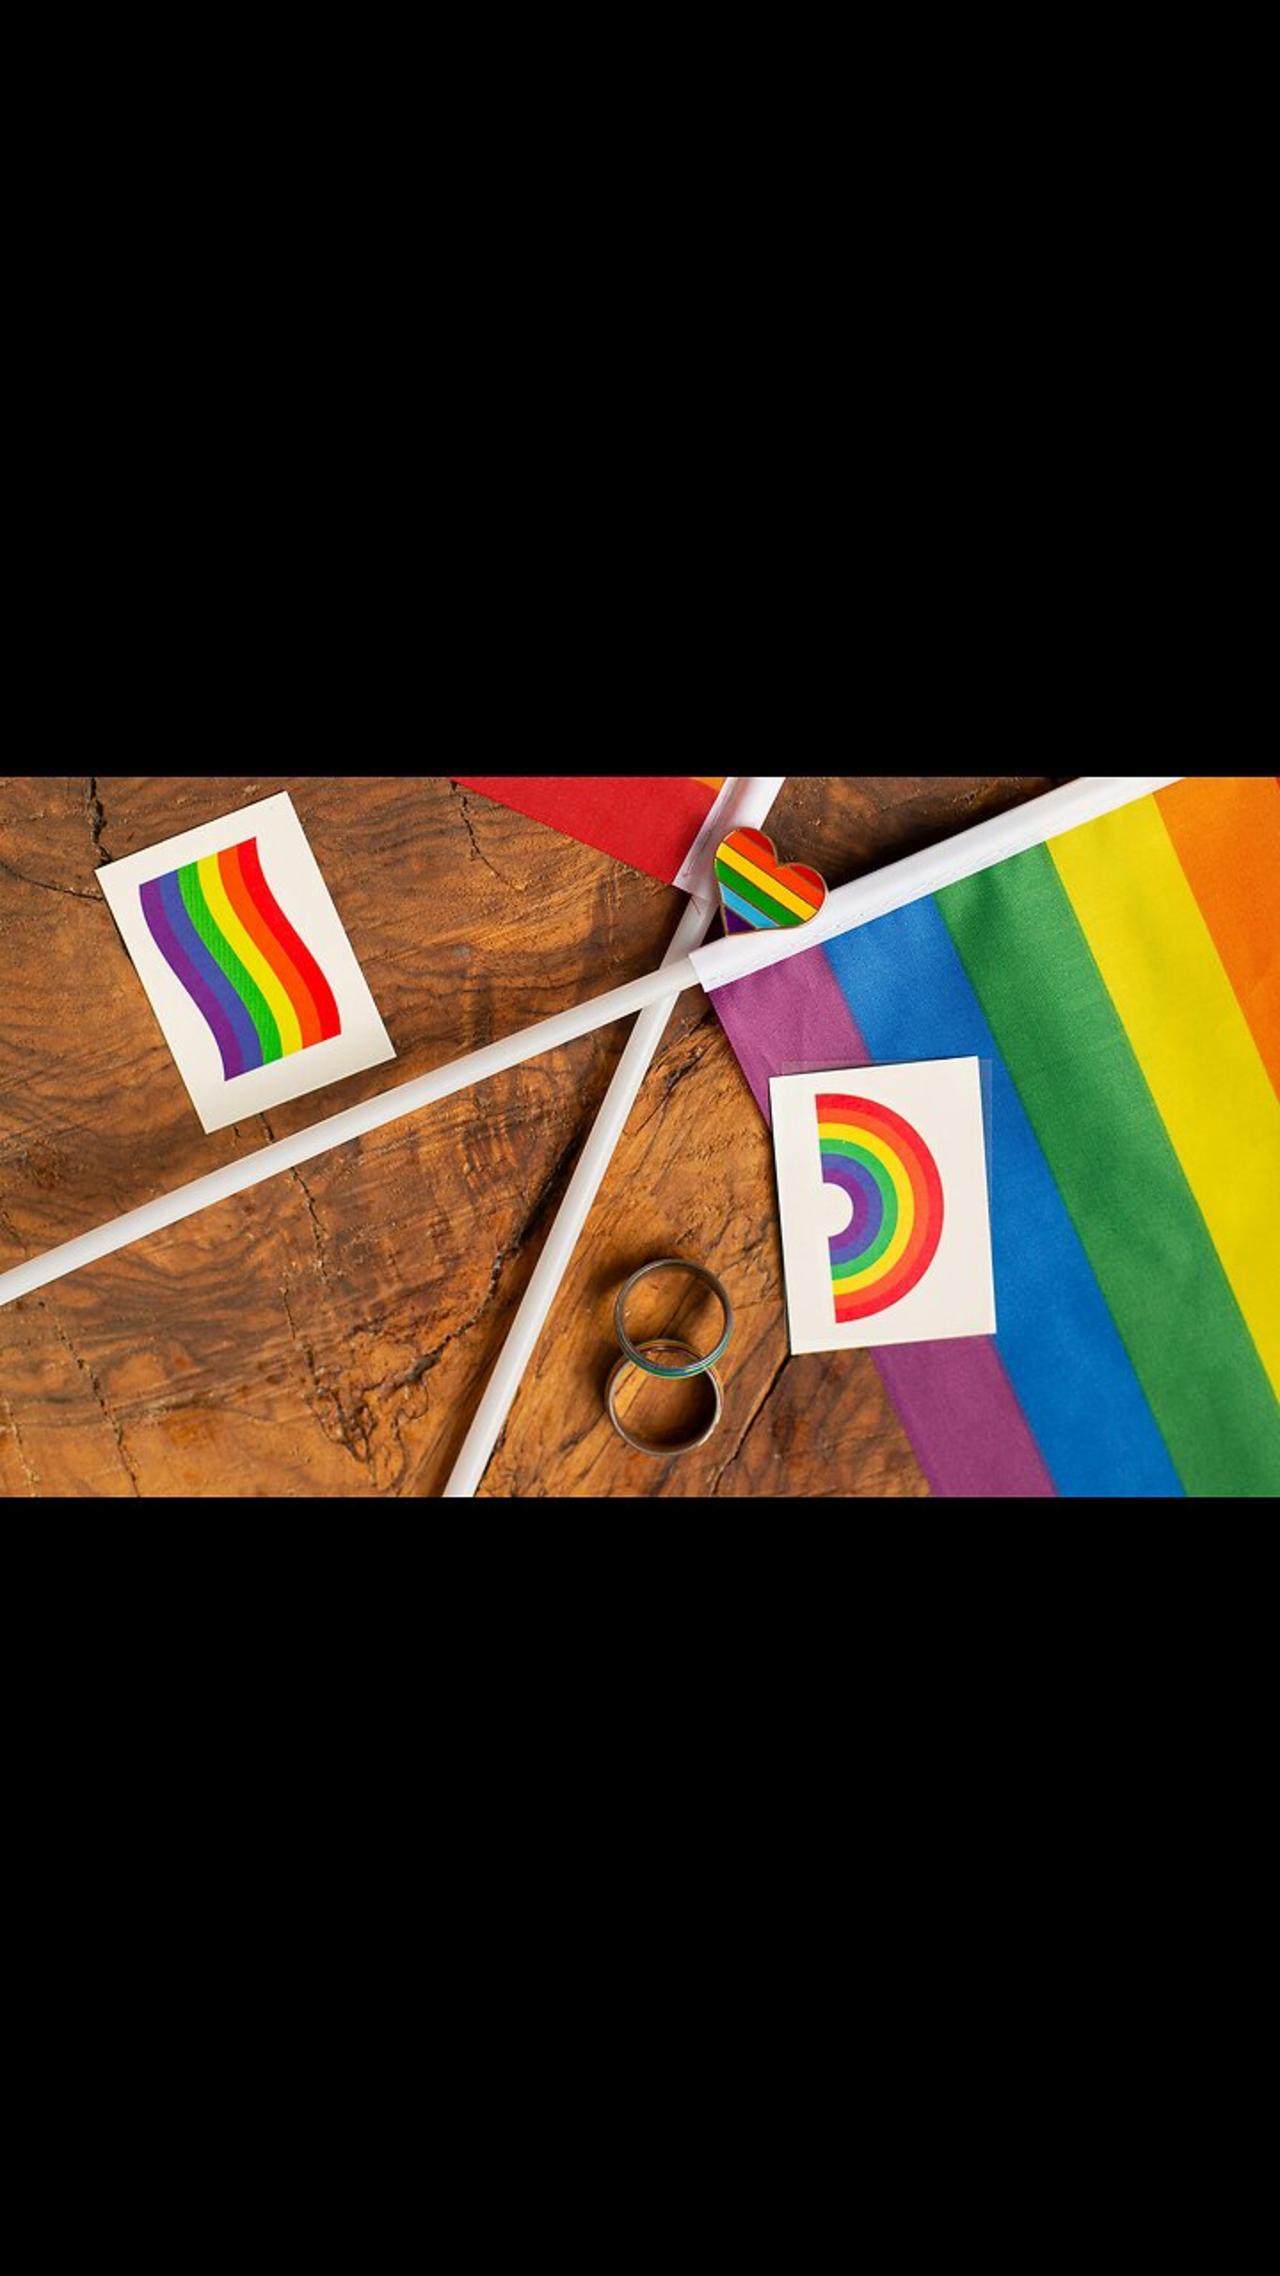 What Does the Paraphiliac Pride Flag Mean?